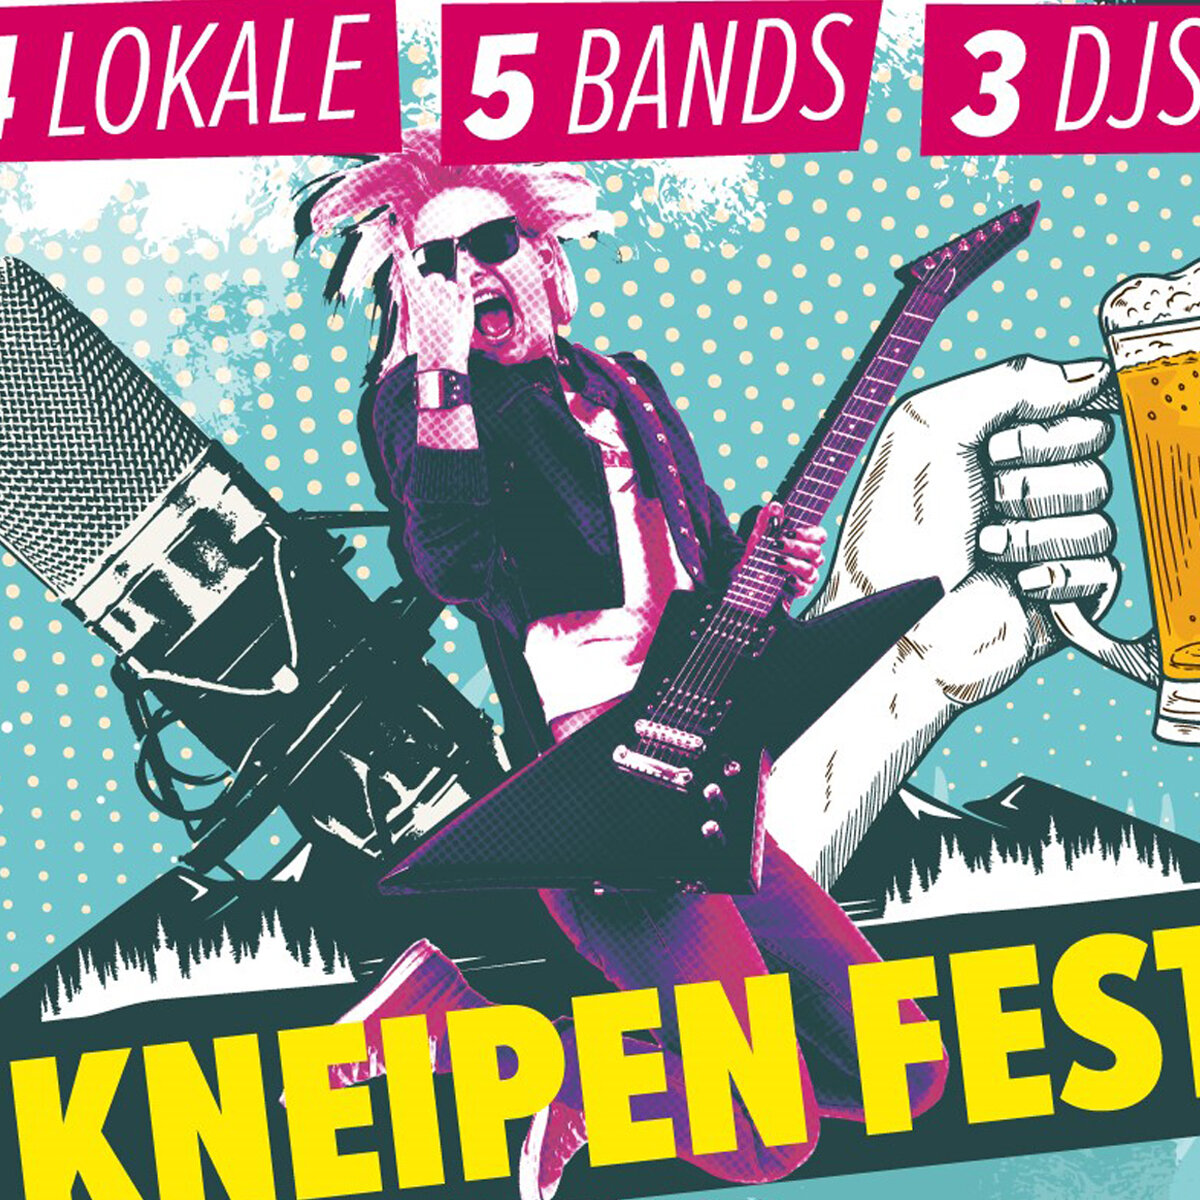 Kneipenfest